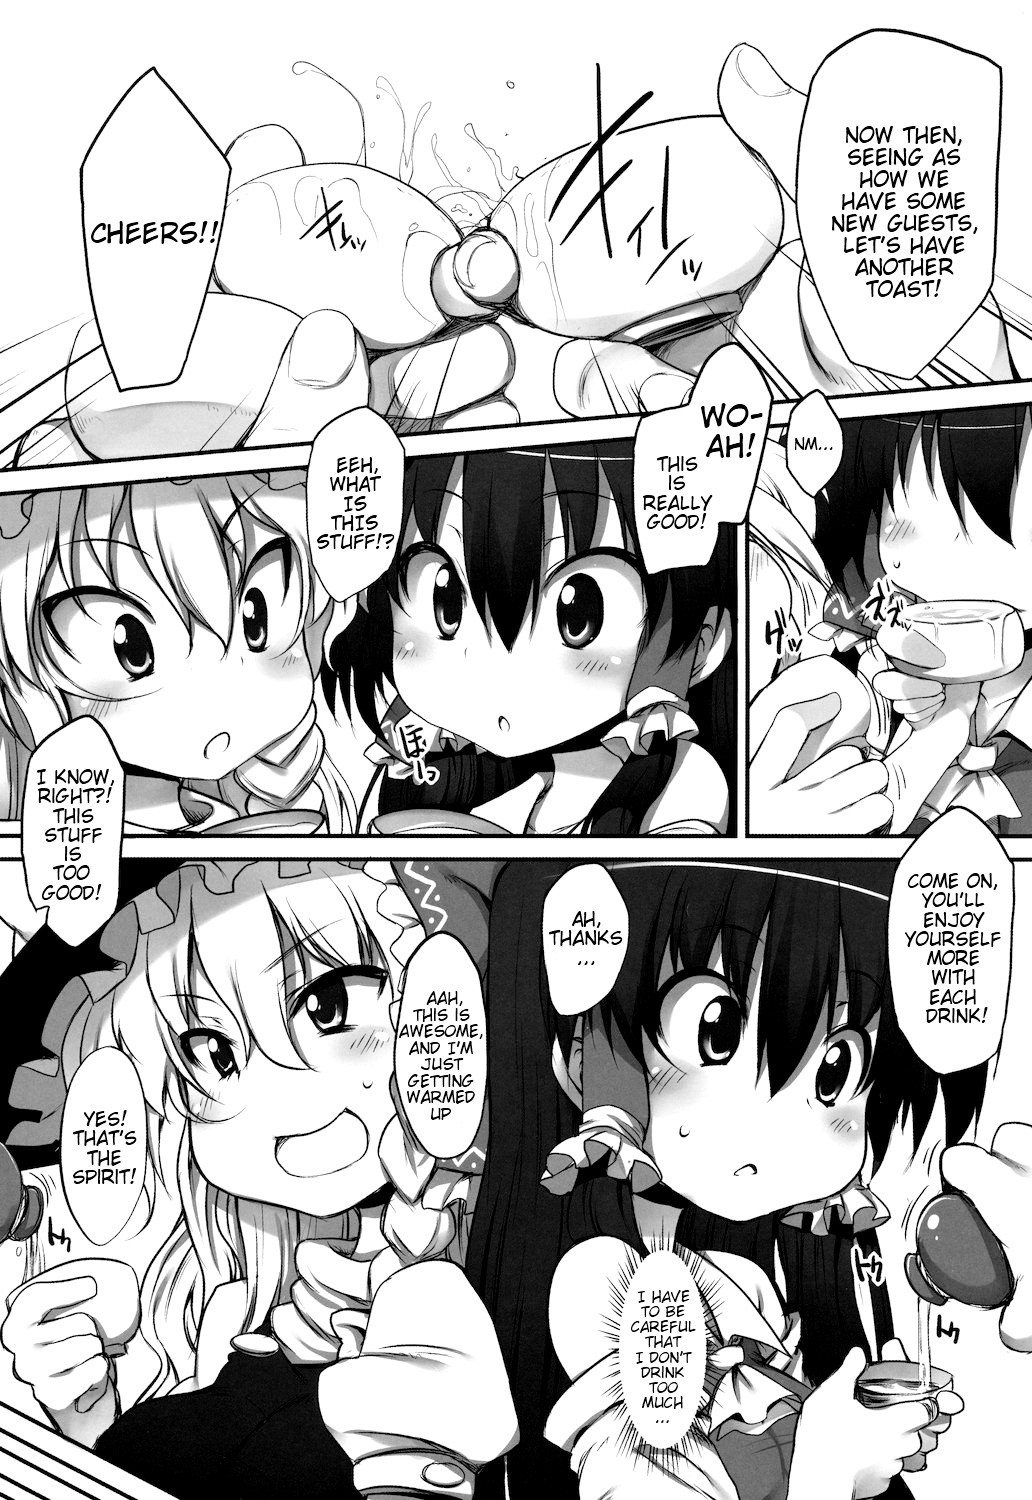 THE PARTY of Gensoukyou -Part I hentai manga picture 4